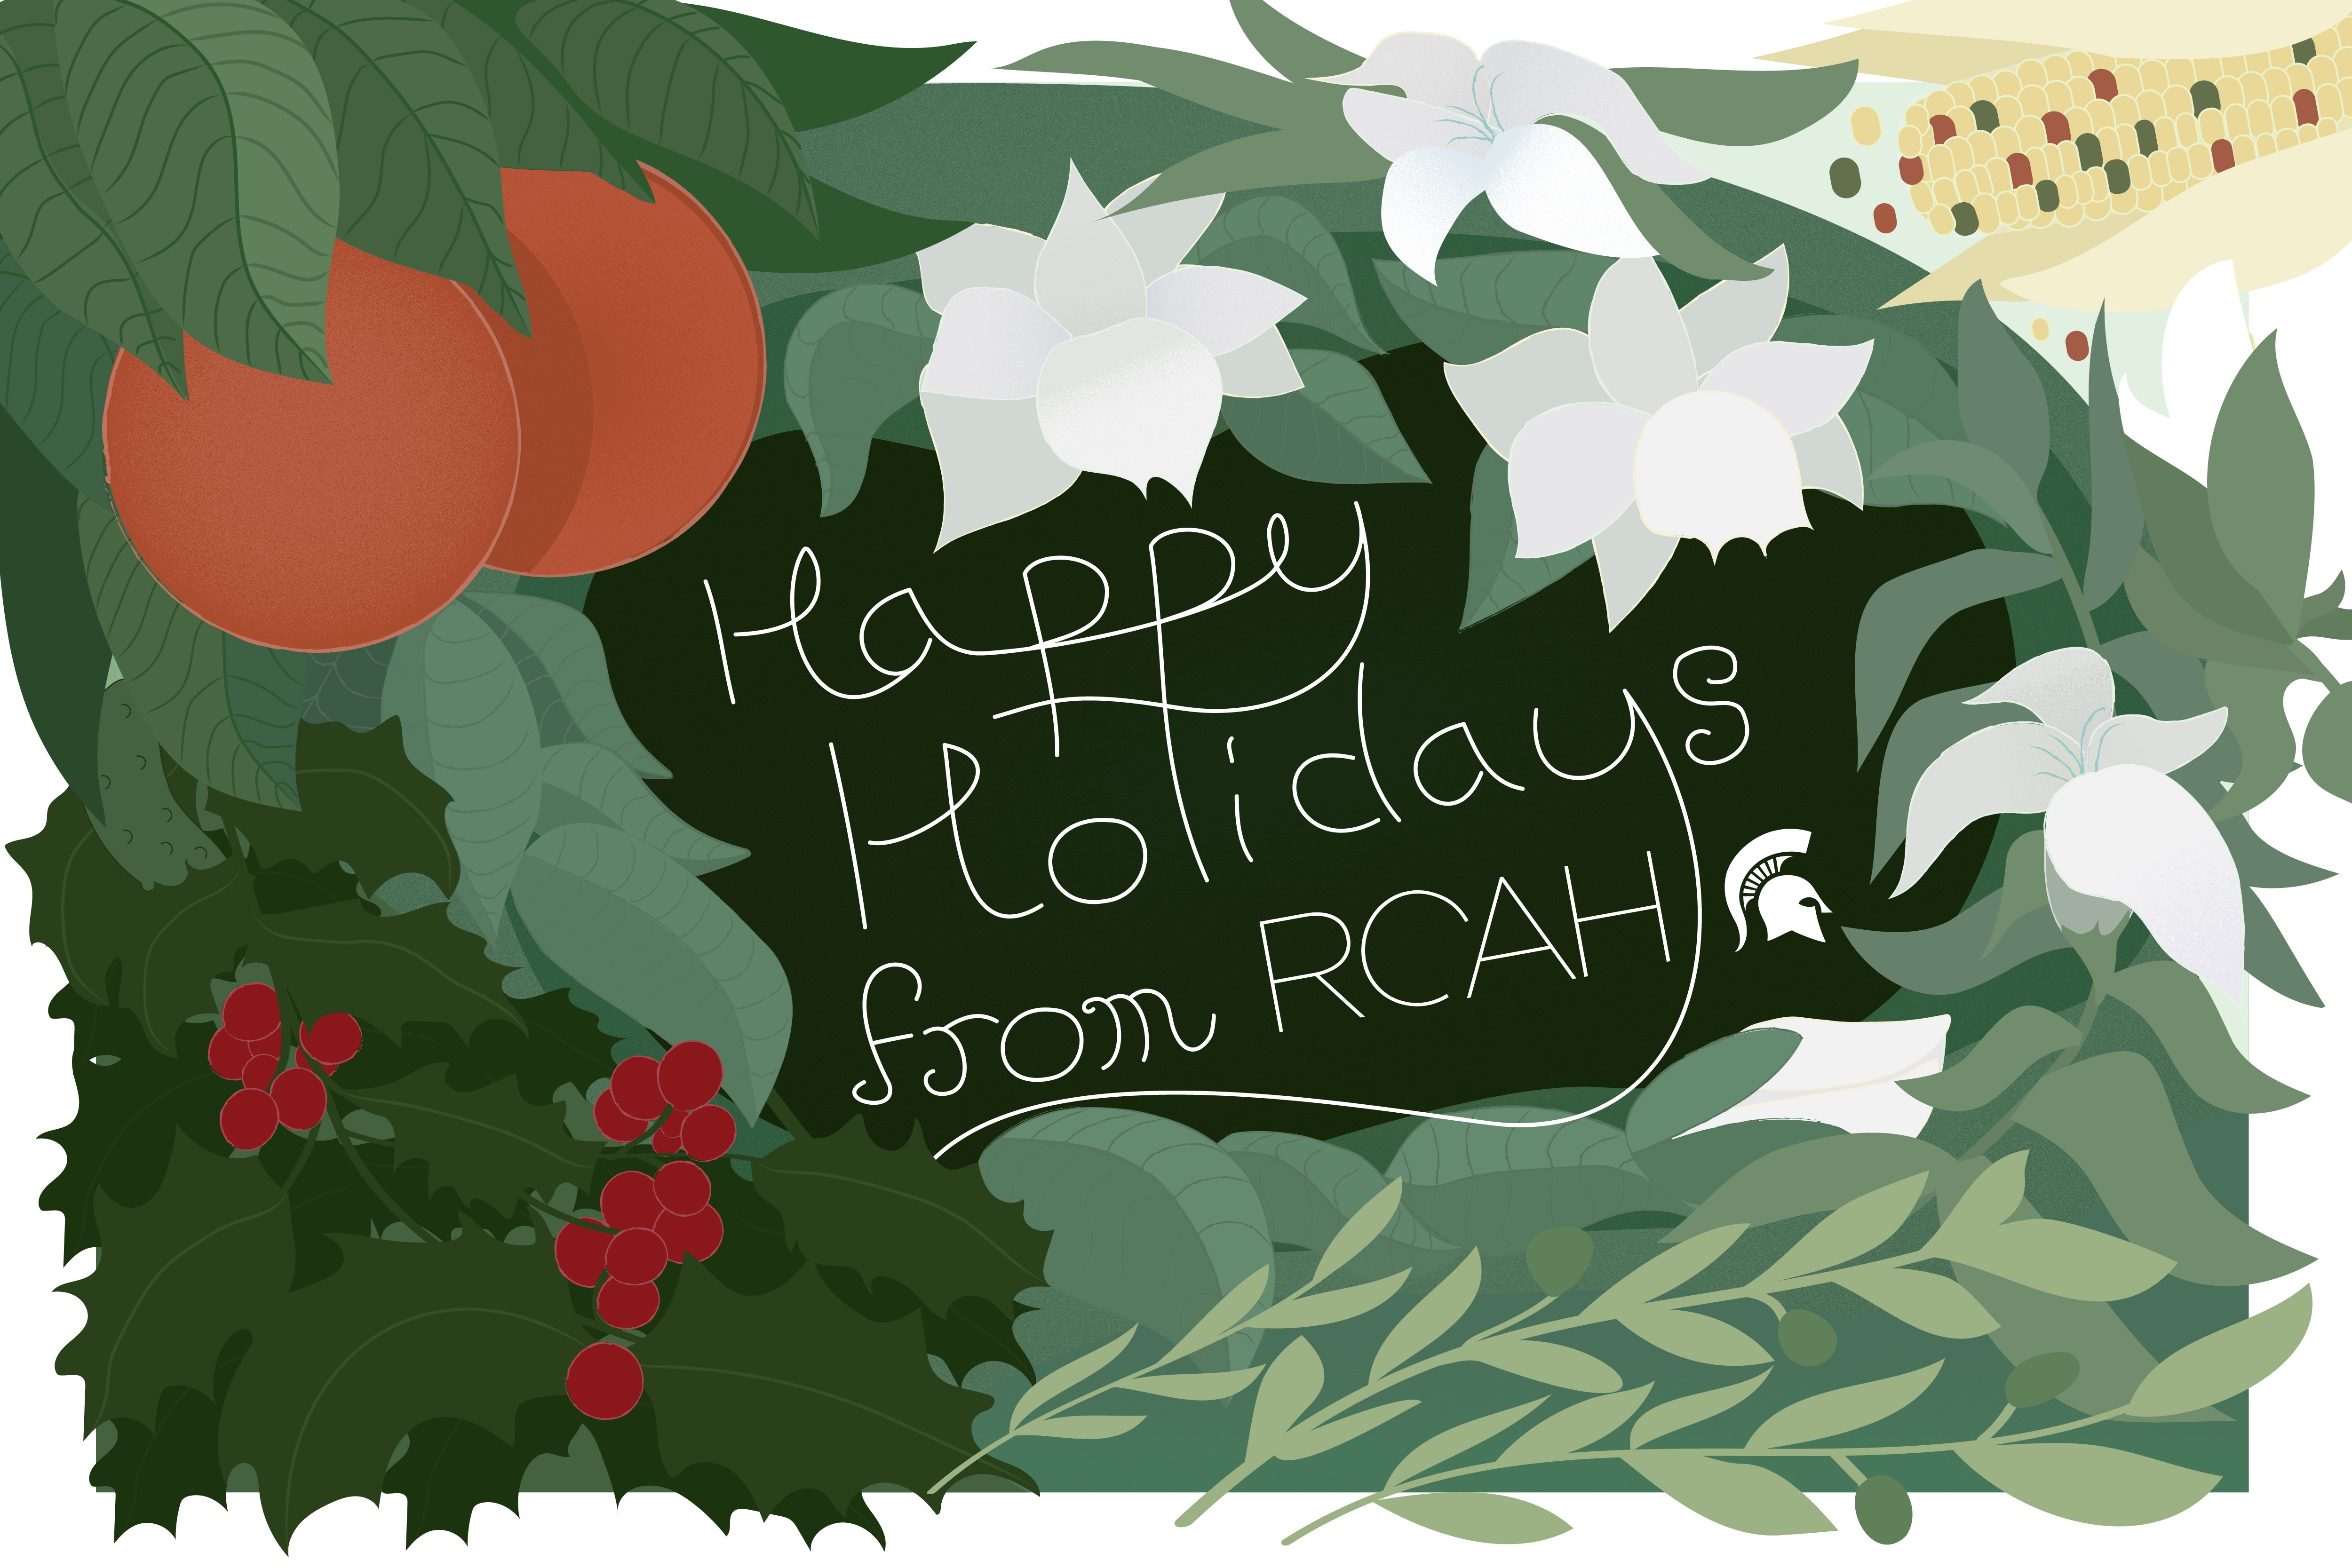 A holiday card with illustrated plants to represent different seasonal holidays, including orange, holly, magnolia, olive, lilies, and corn, for Christmas, Yule, Solstice, Hanukkah, and Kwanzaa. Text in the middle of the card in loopy white letters reads "Happy Holidays from RCAH" and includes a tiny Spartan helmet.